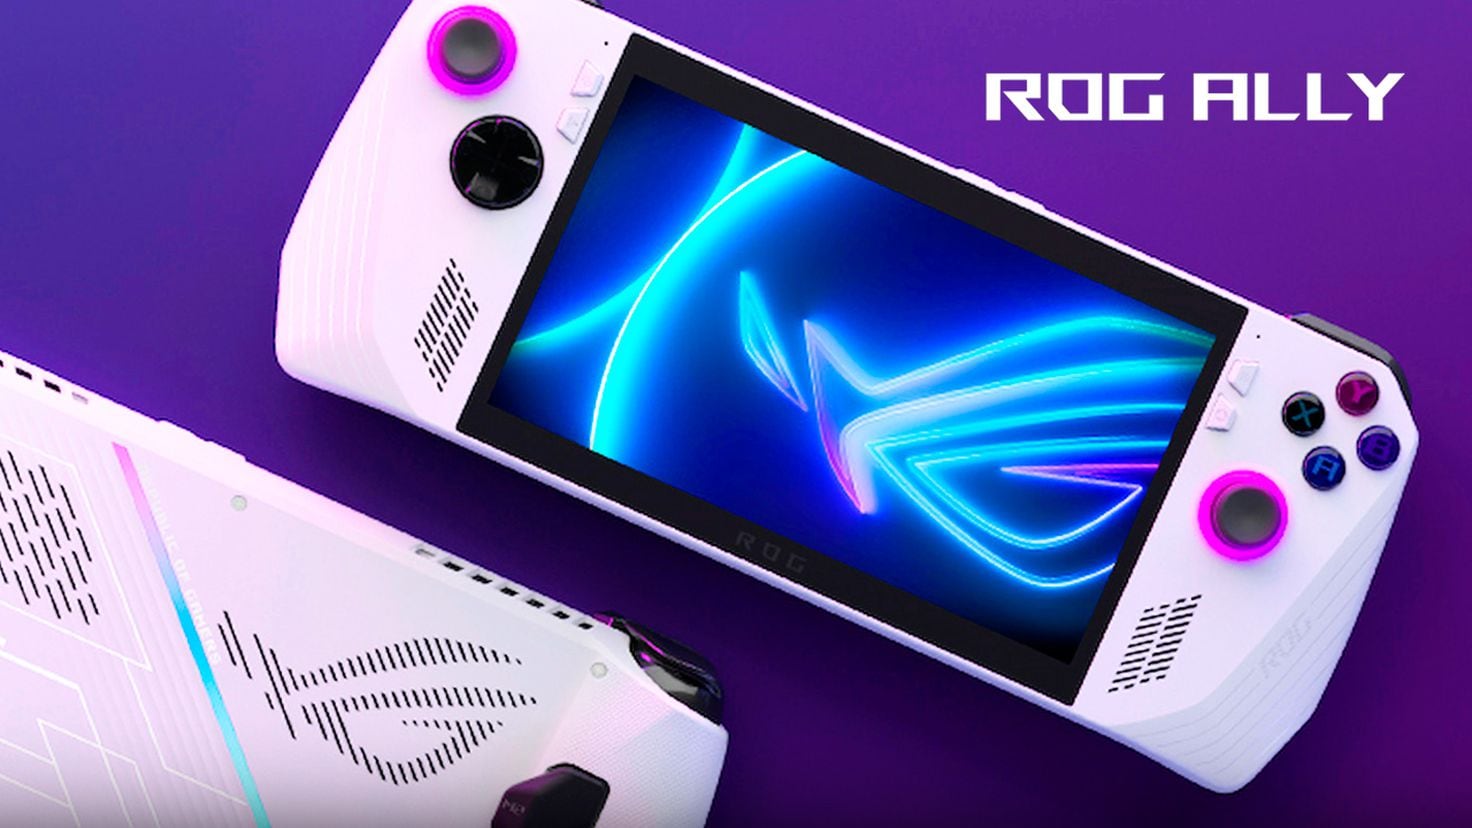 ASUS Launches the ROG Ally, Its First PC Handheld